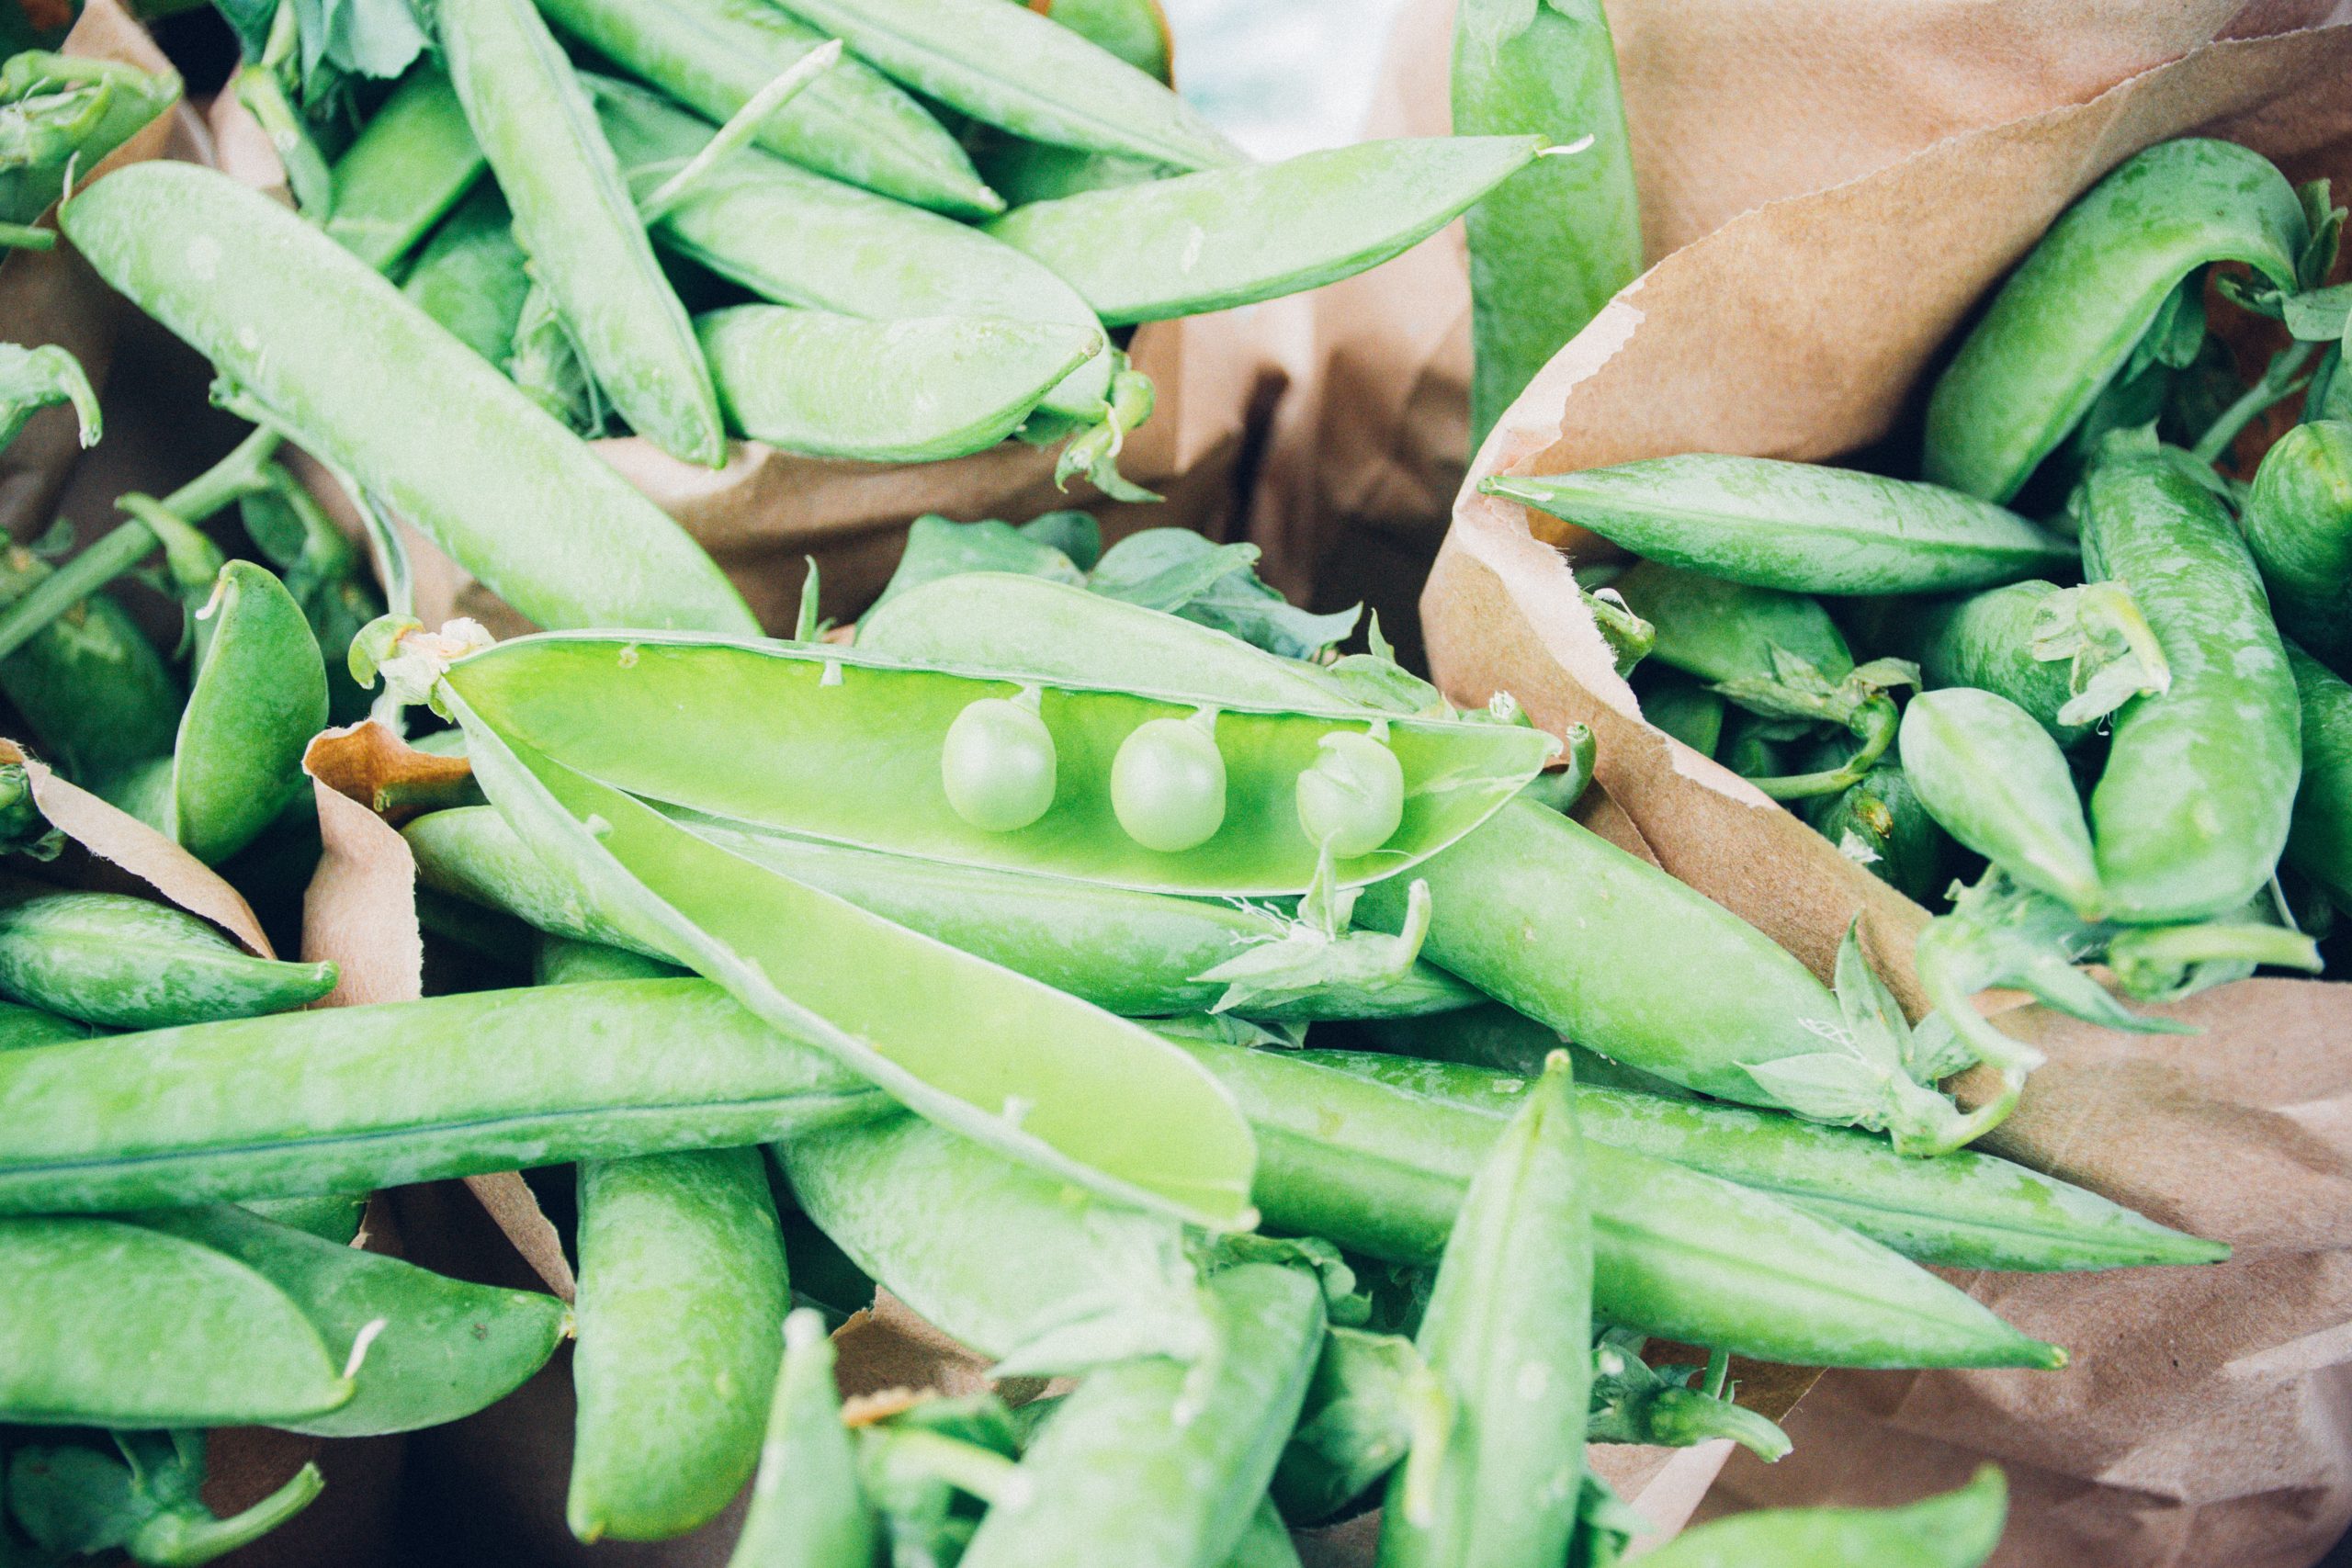 Can You Plant Peas From The Grocery Store?